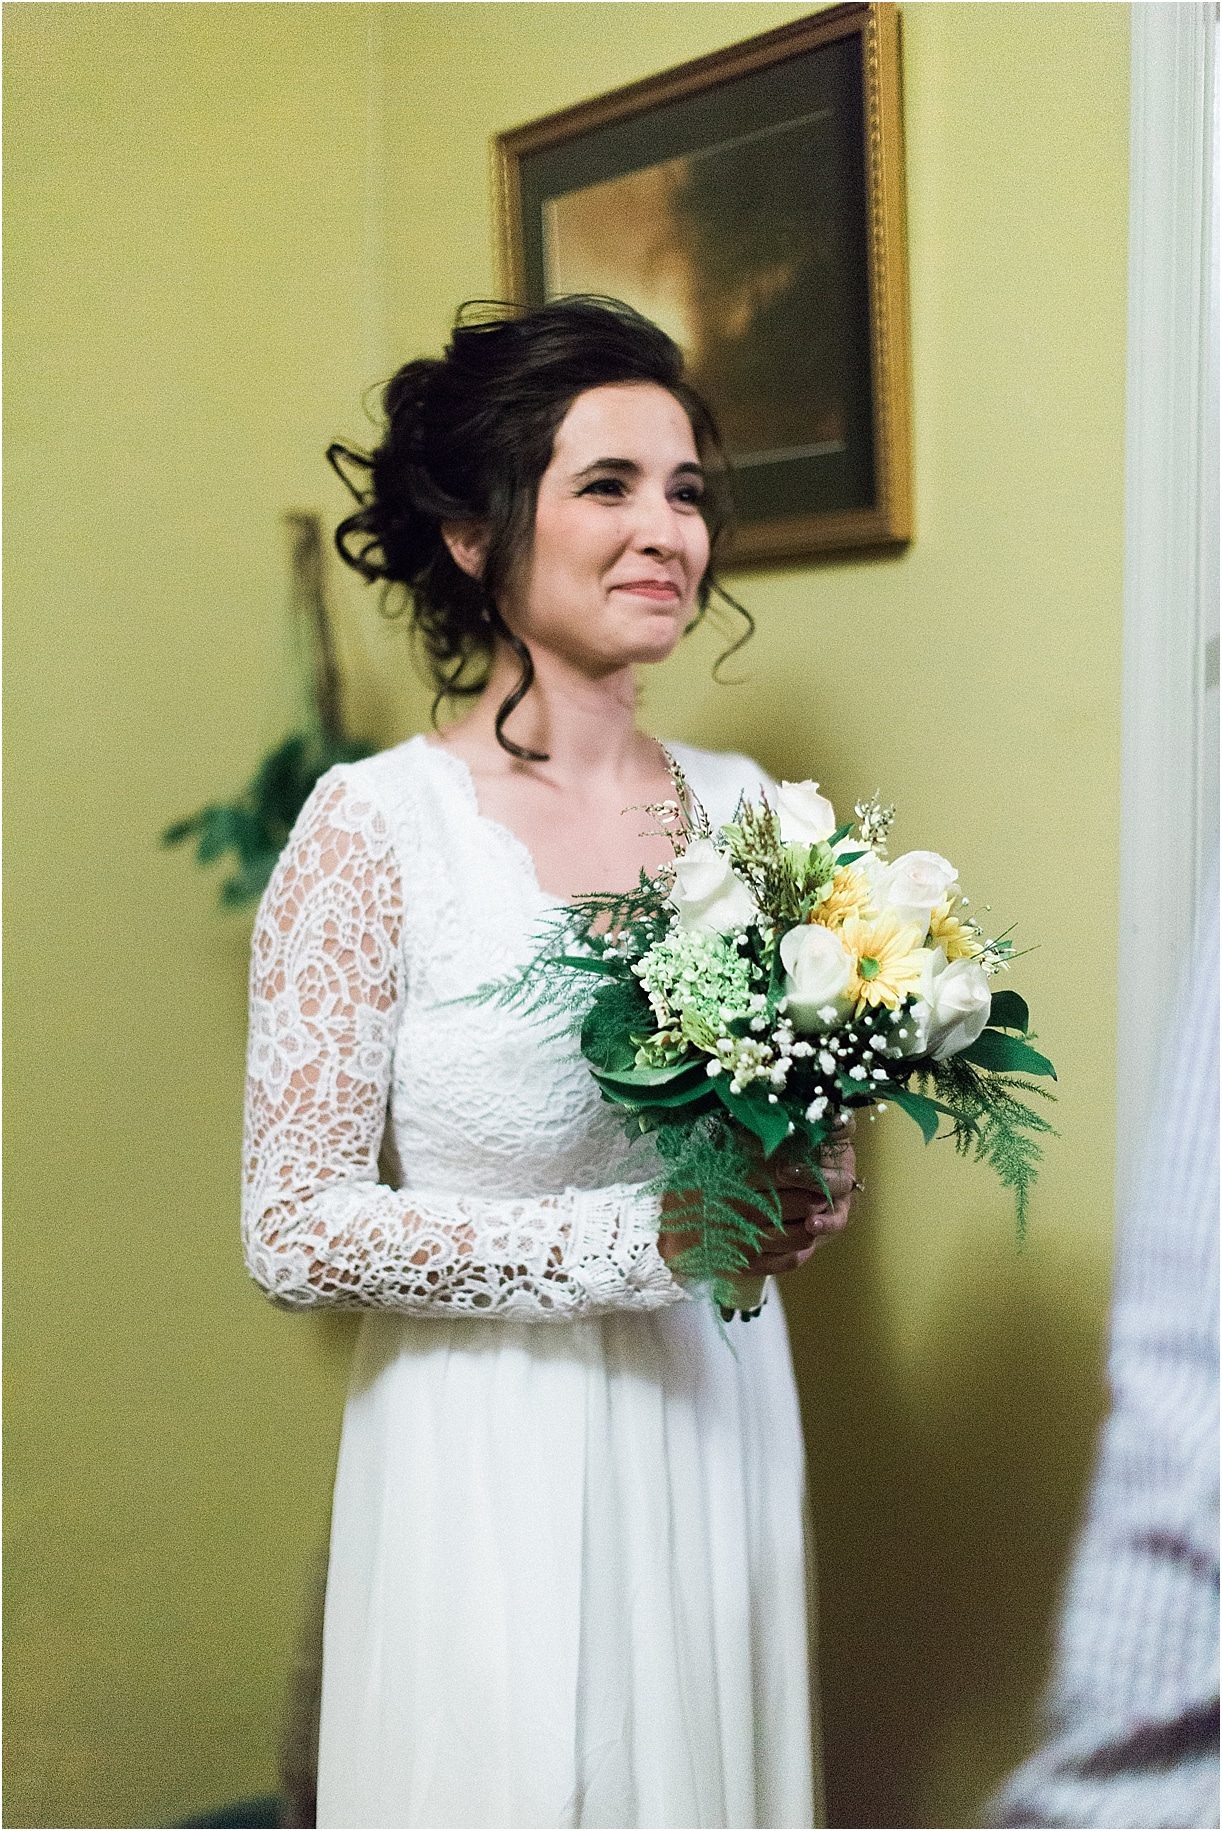 White Hart Wedding in Lynchburg as seen on Hill City Bride Virginia Wedding Blog by Gaudium Photography - bride, flowers, gown